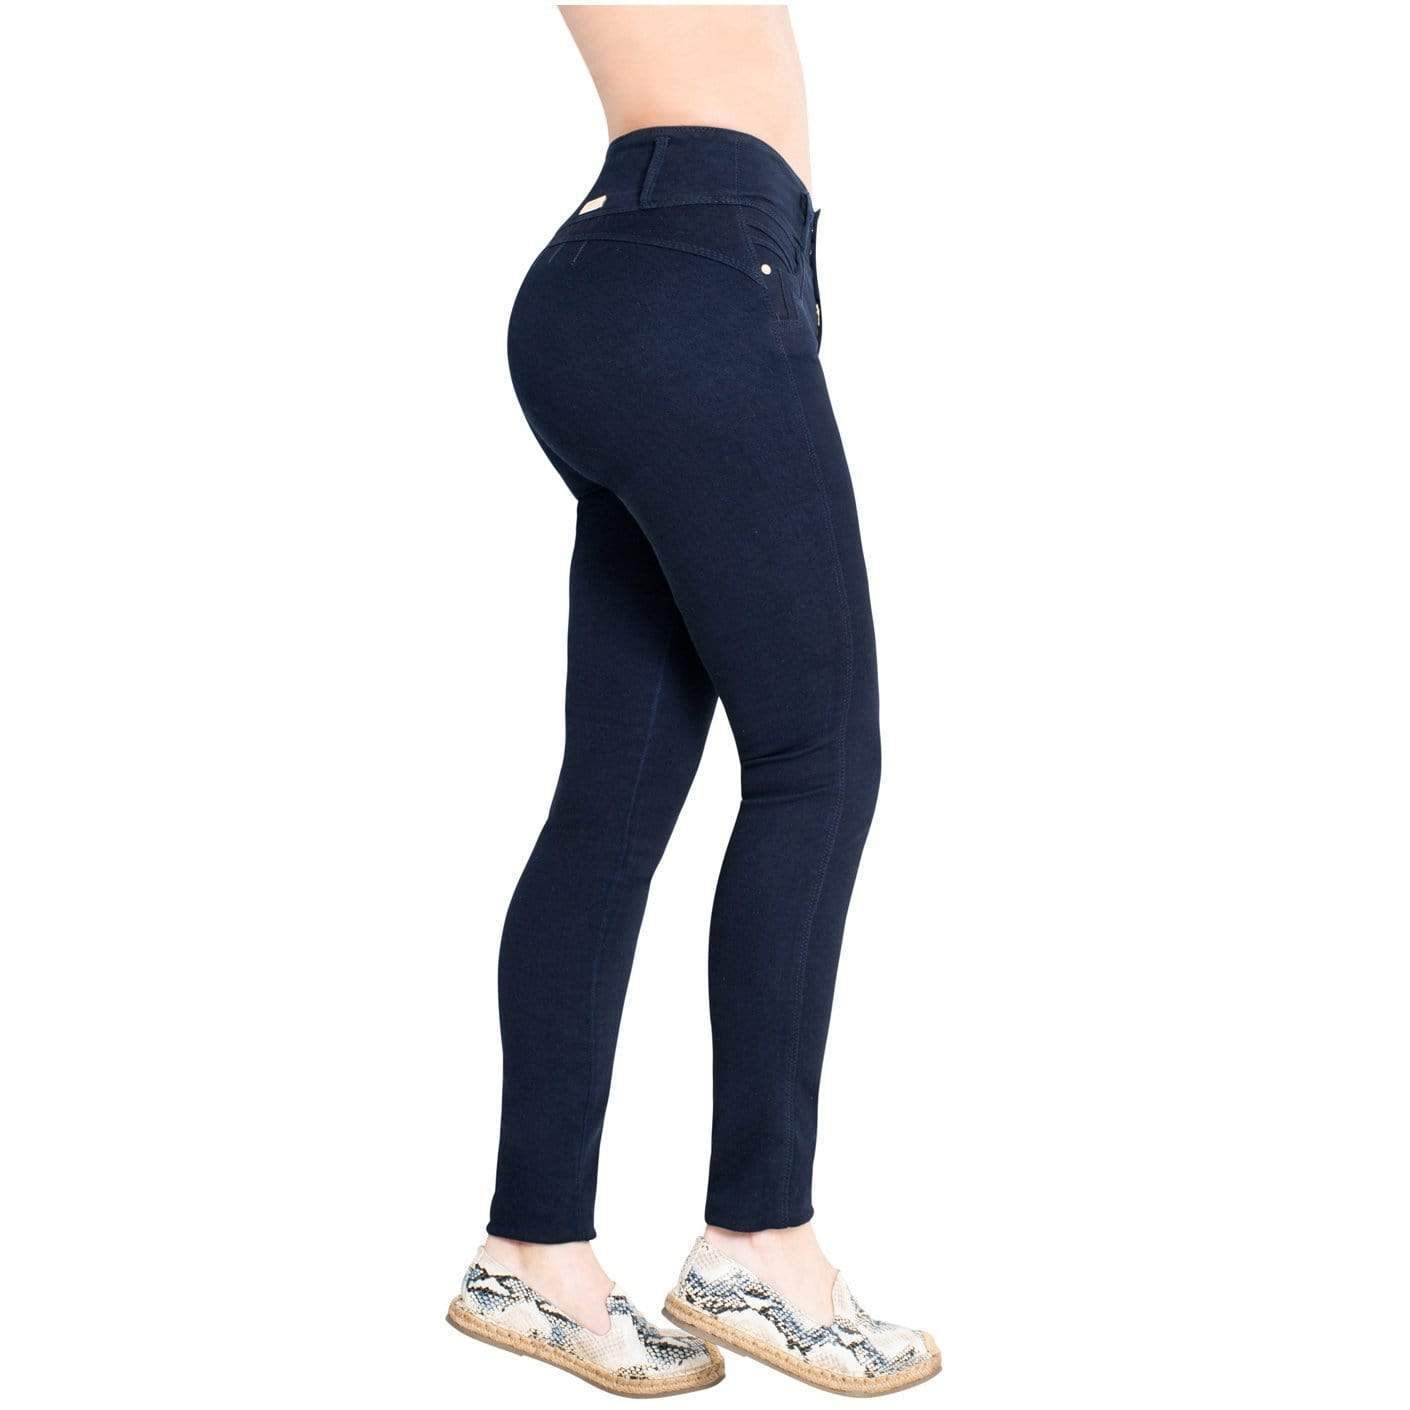 LT.Rose Jeans: CS3B04 - Mid-Rise Butt Lifter Skinny Jeans - Showmee Store